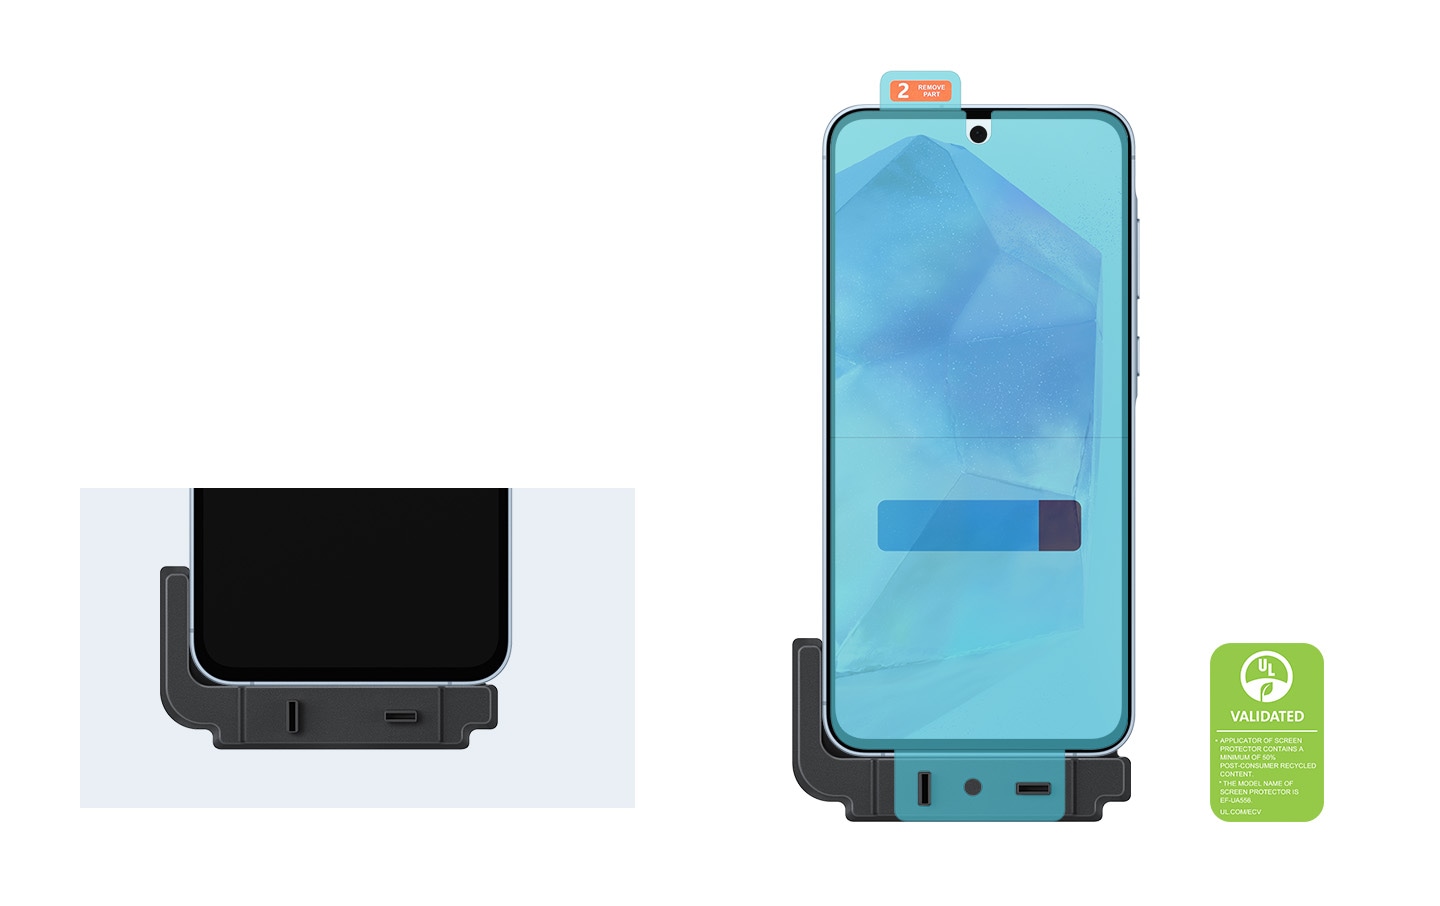 An installation frame is shown with a Galaxy device placed and aligned for installation. To the right, another Galaxy device aligned with the installation frame has a Screen Protector aligned, placed on top and ready to peel and use. At the bottom is the UL Environmental Claim Validation logo 'APPLICATOR OF SCREEN PROTECTOR CONTAINS A MINIMUM OF 50% POST-CONSUMER RECYCLED CONTENT. *THE MODEL NAME OF SCREEN PROTECTOR IS EF-UA556.'